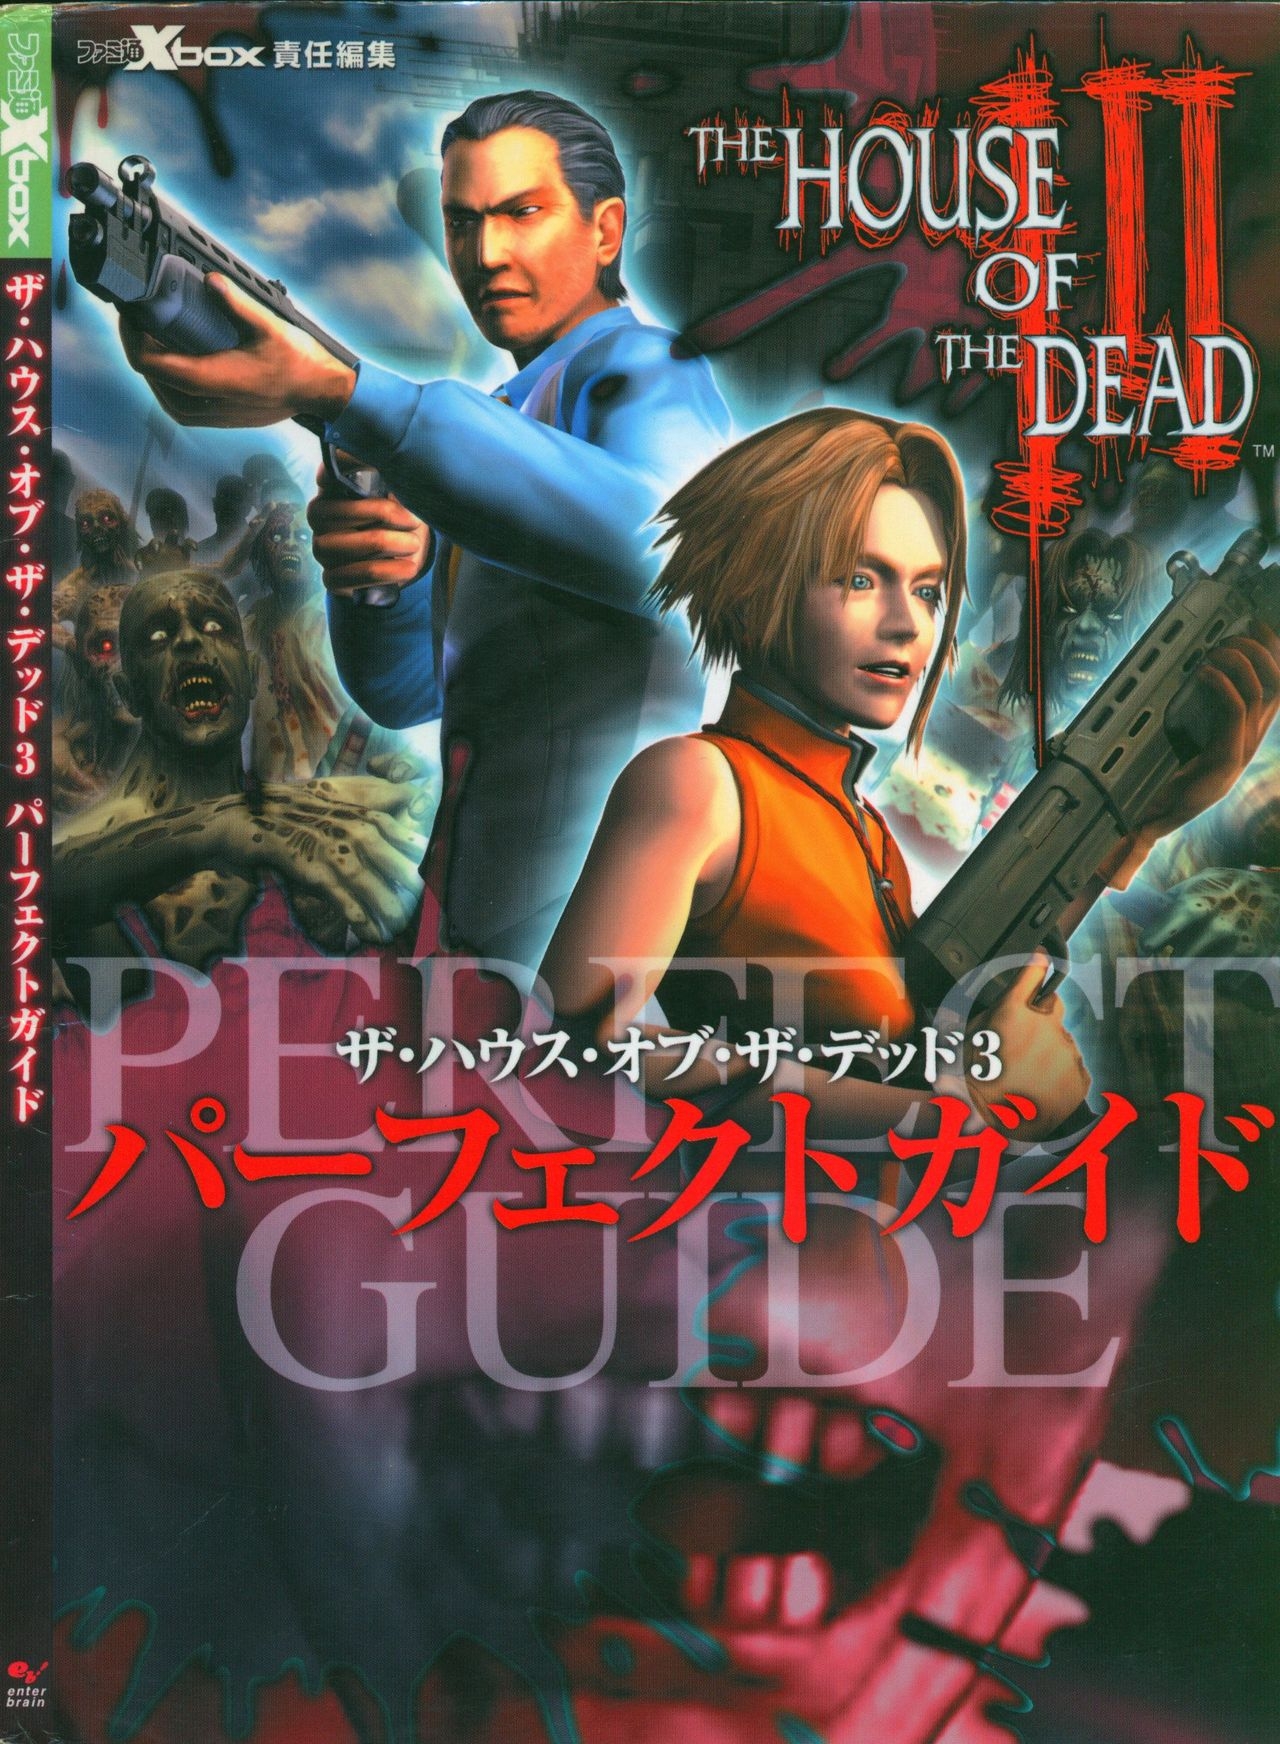 The House of the Dead 3 Perfect Guide 0